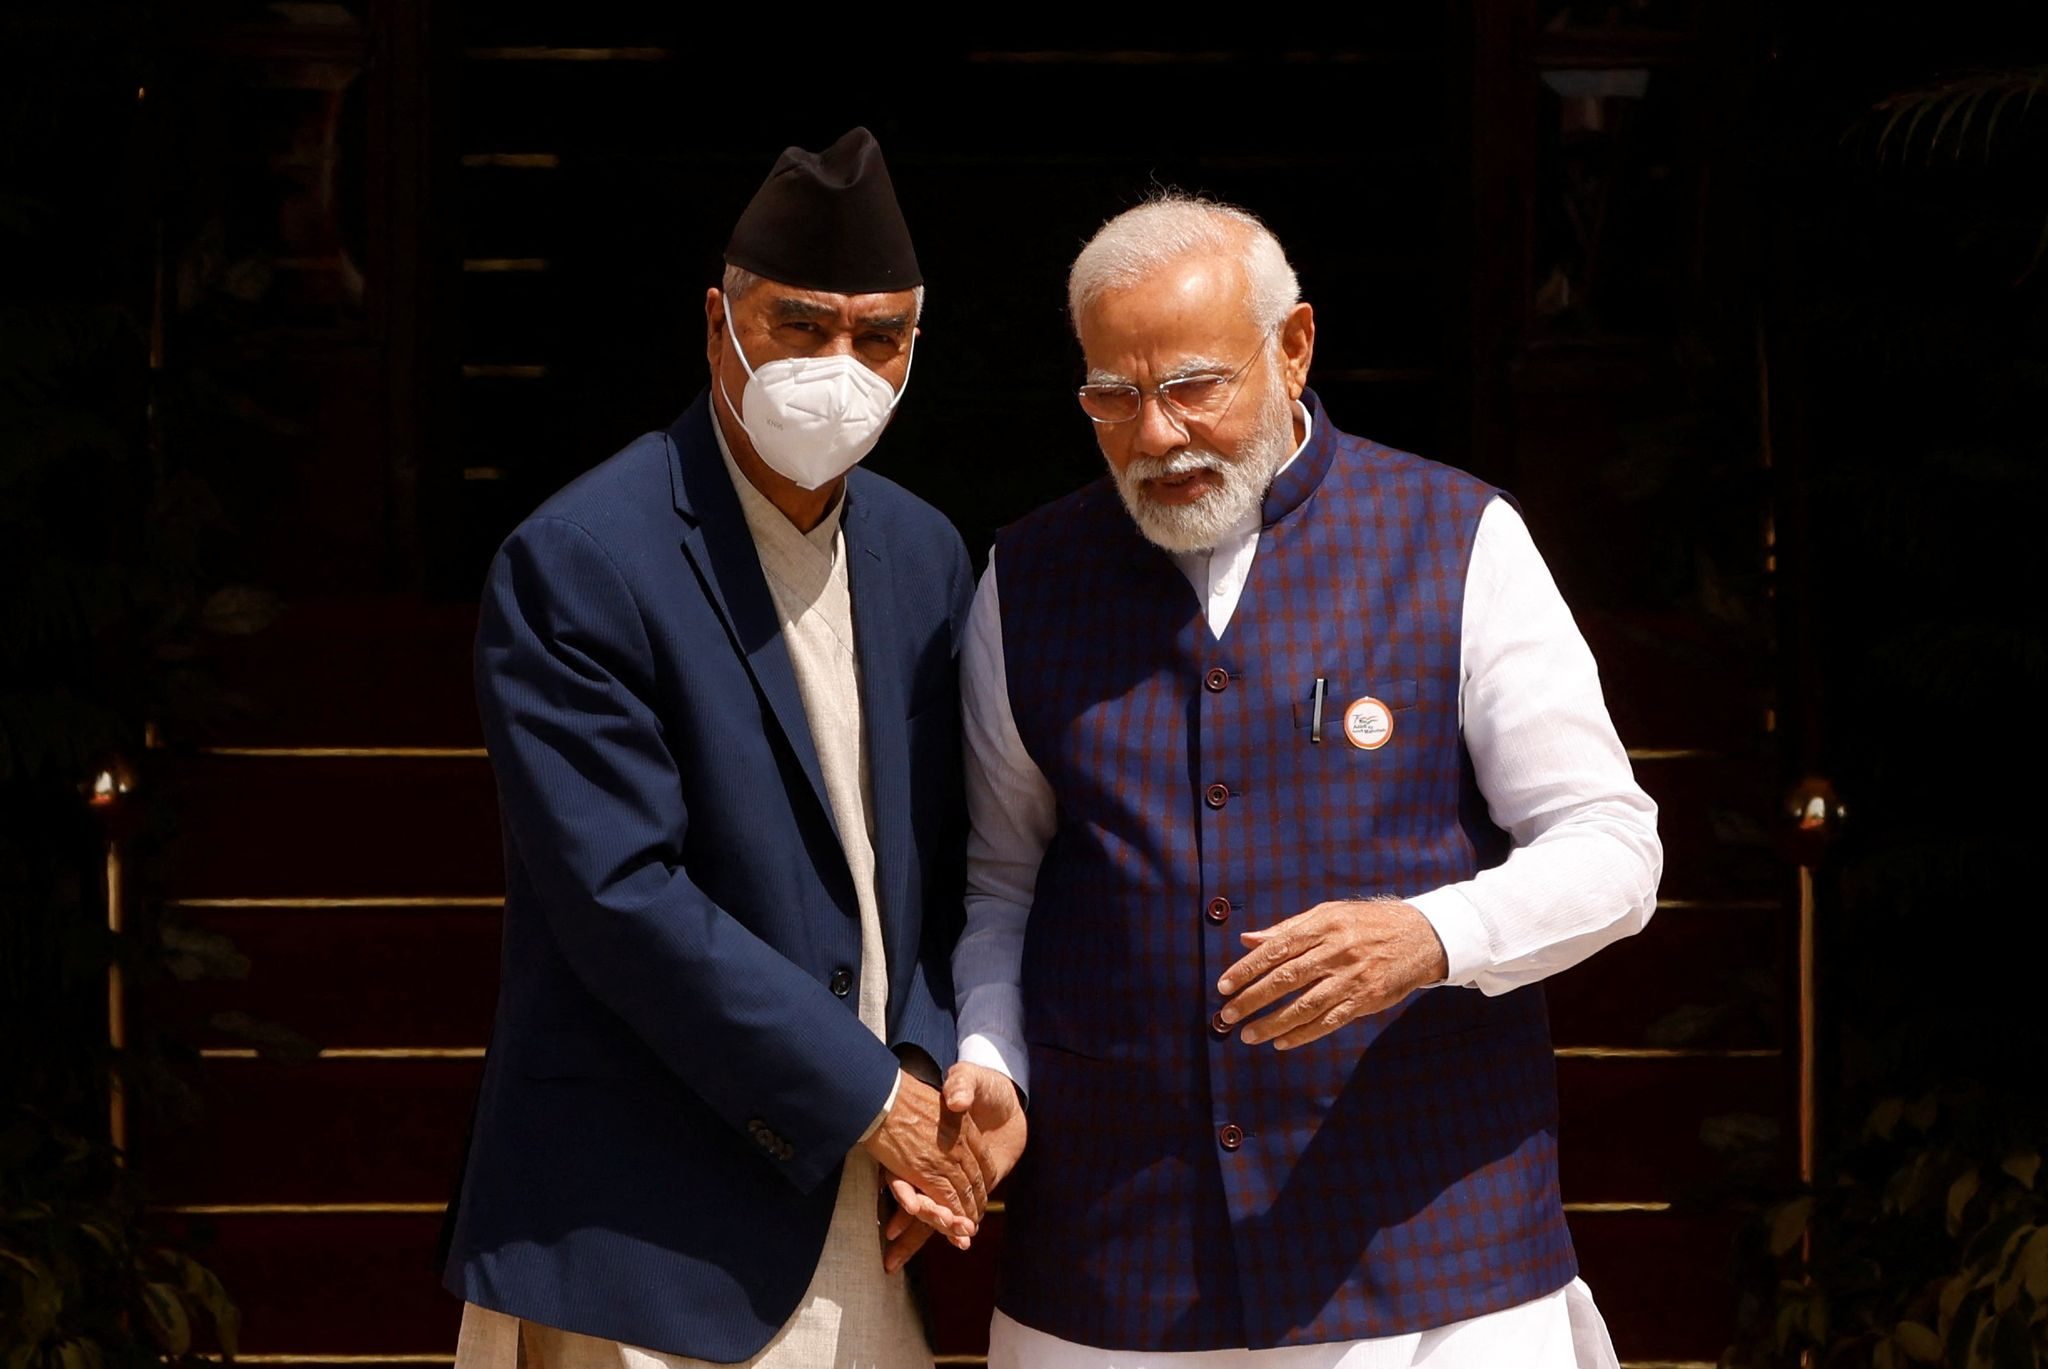 Nepal prime minister visits India, meets Modi to deepen ties